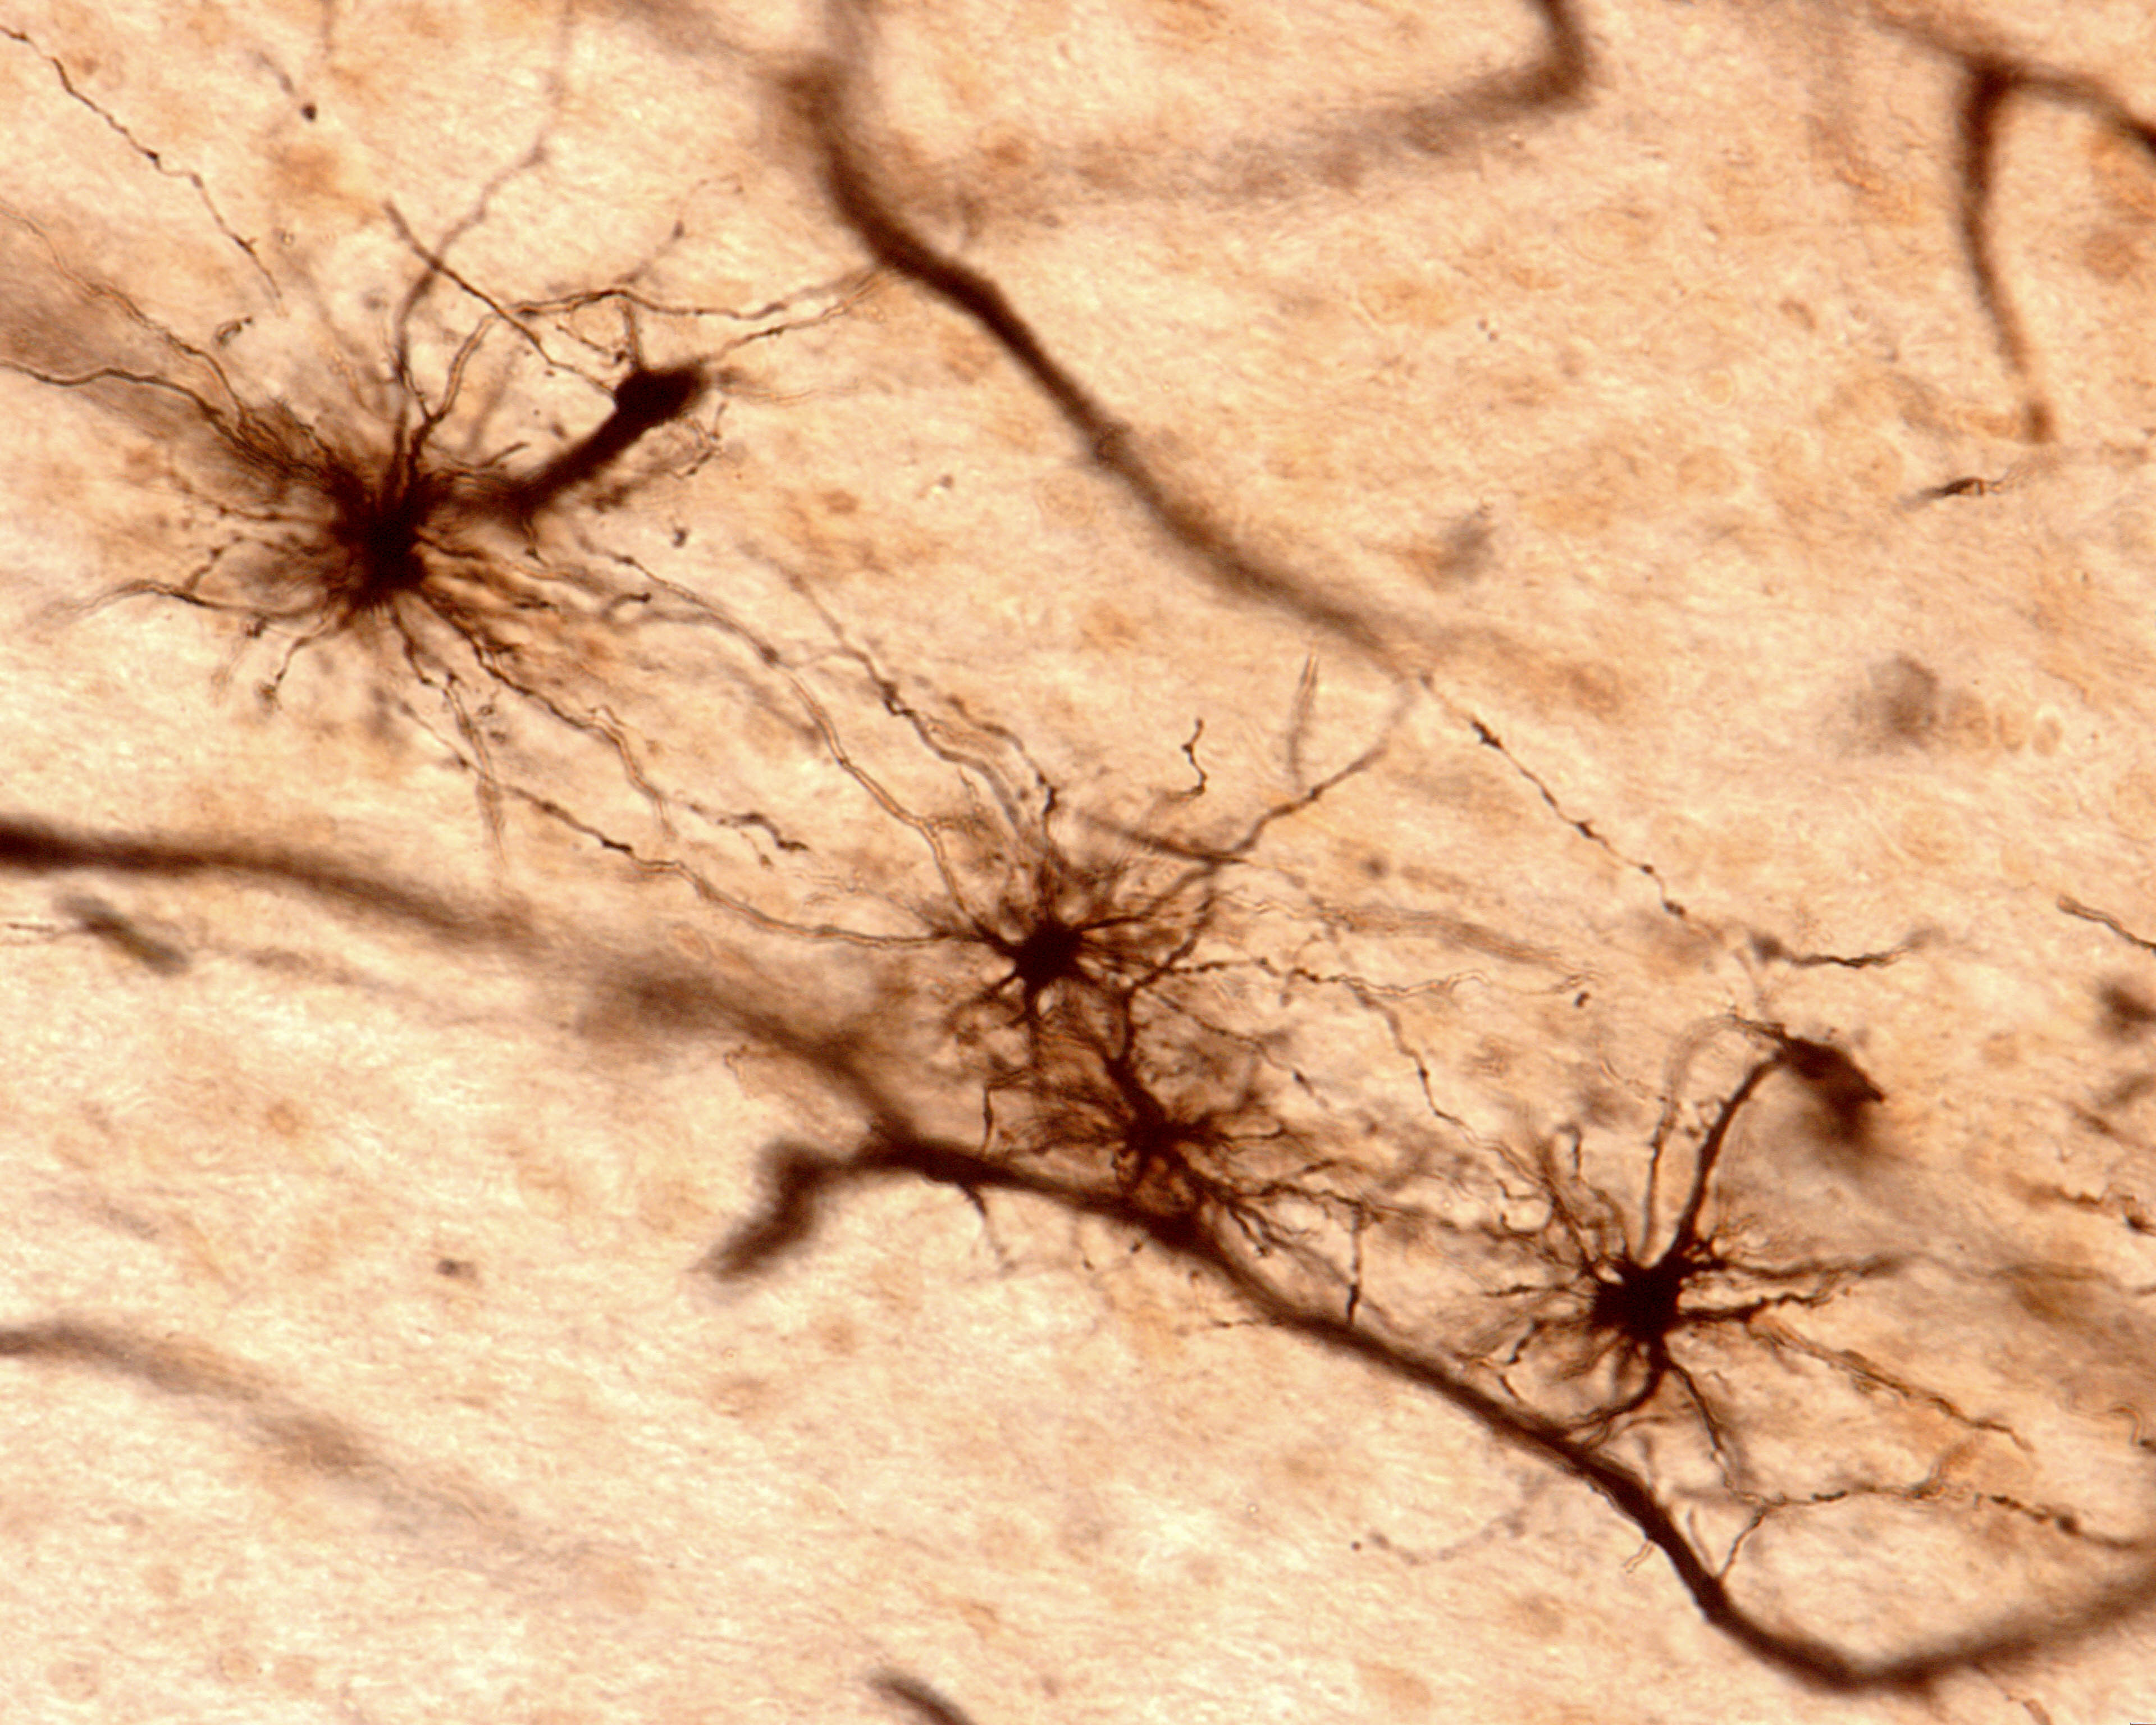 Frataxin deficiency in astrocytes likely contribute to Friedreich's ataxia pathology